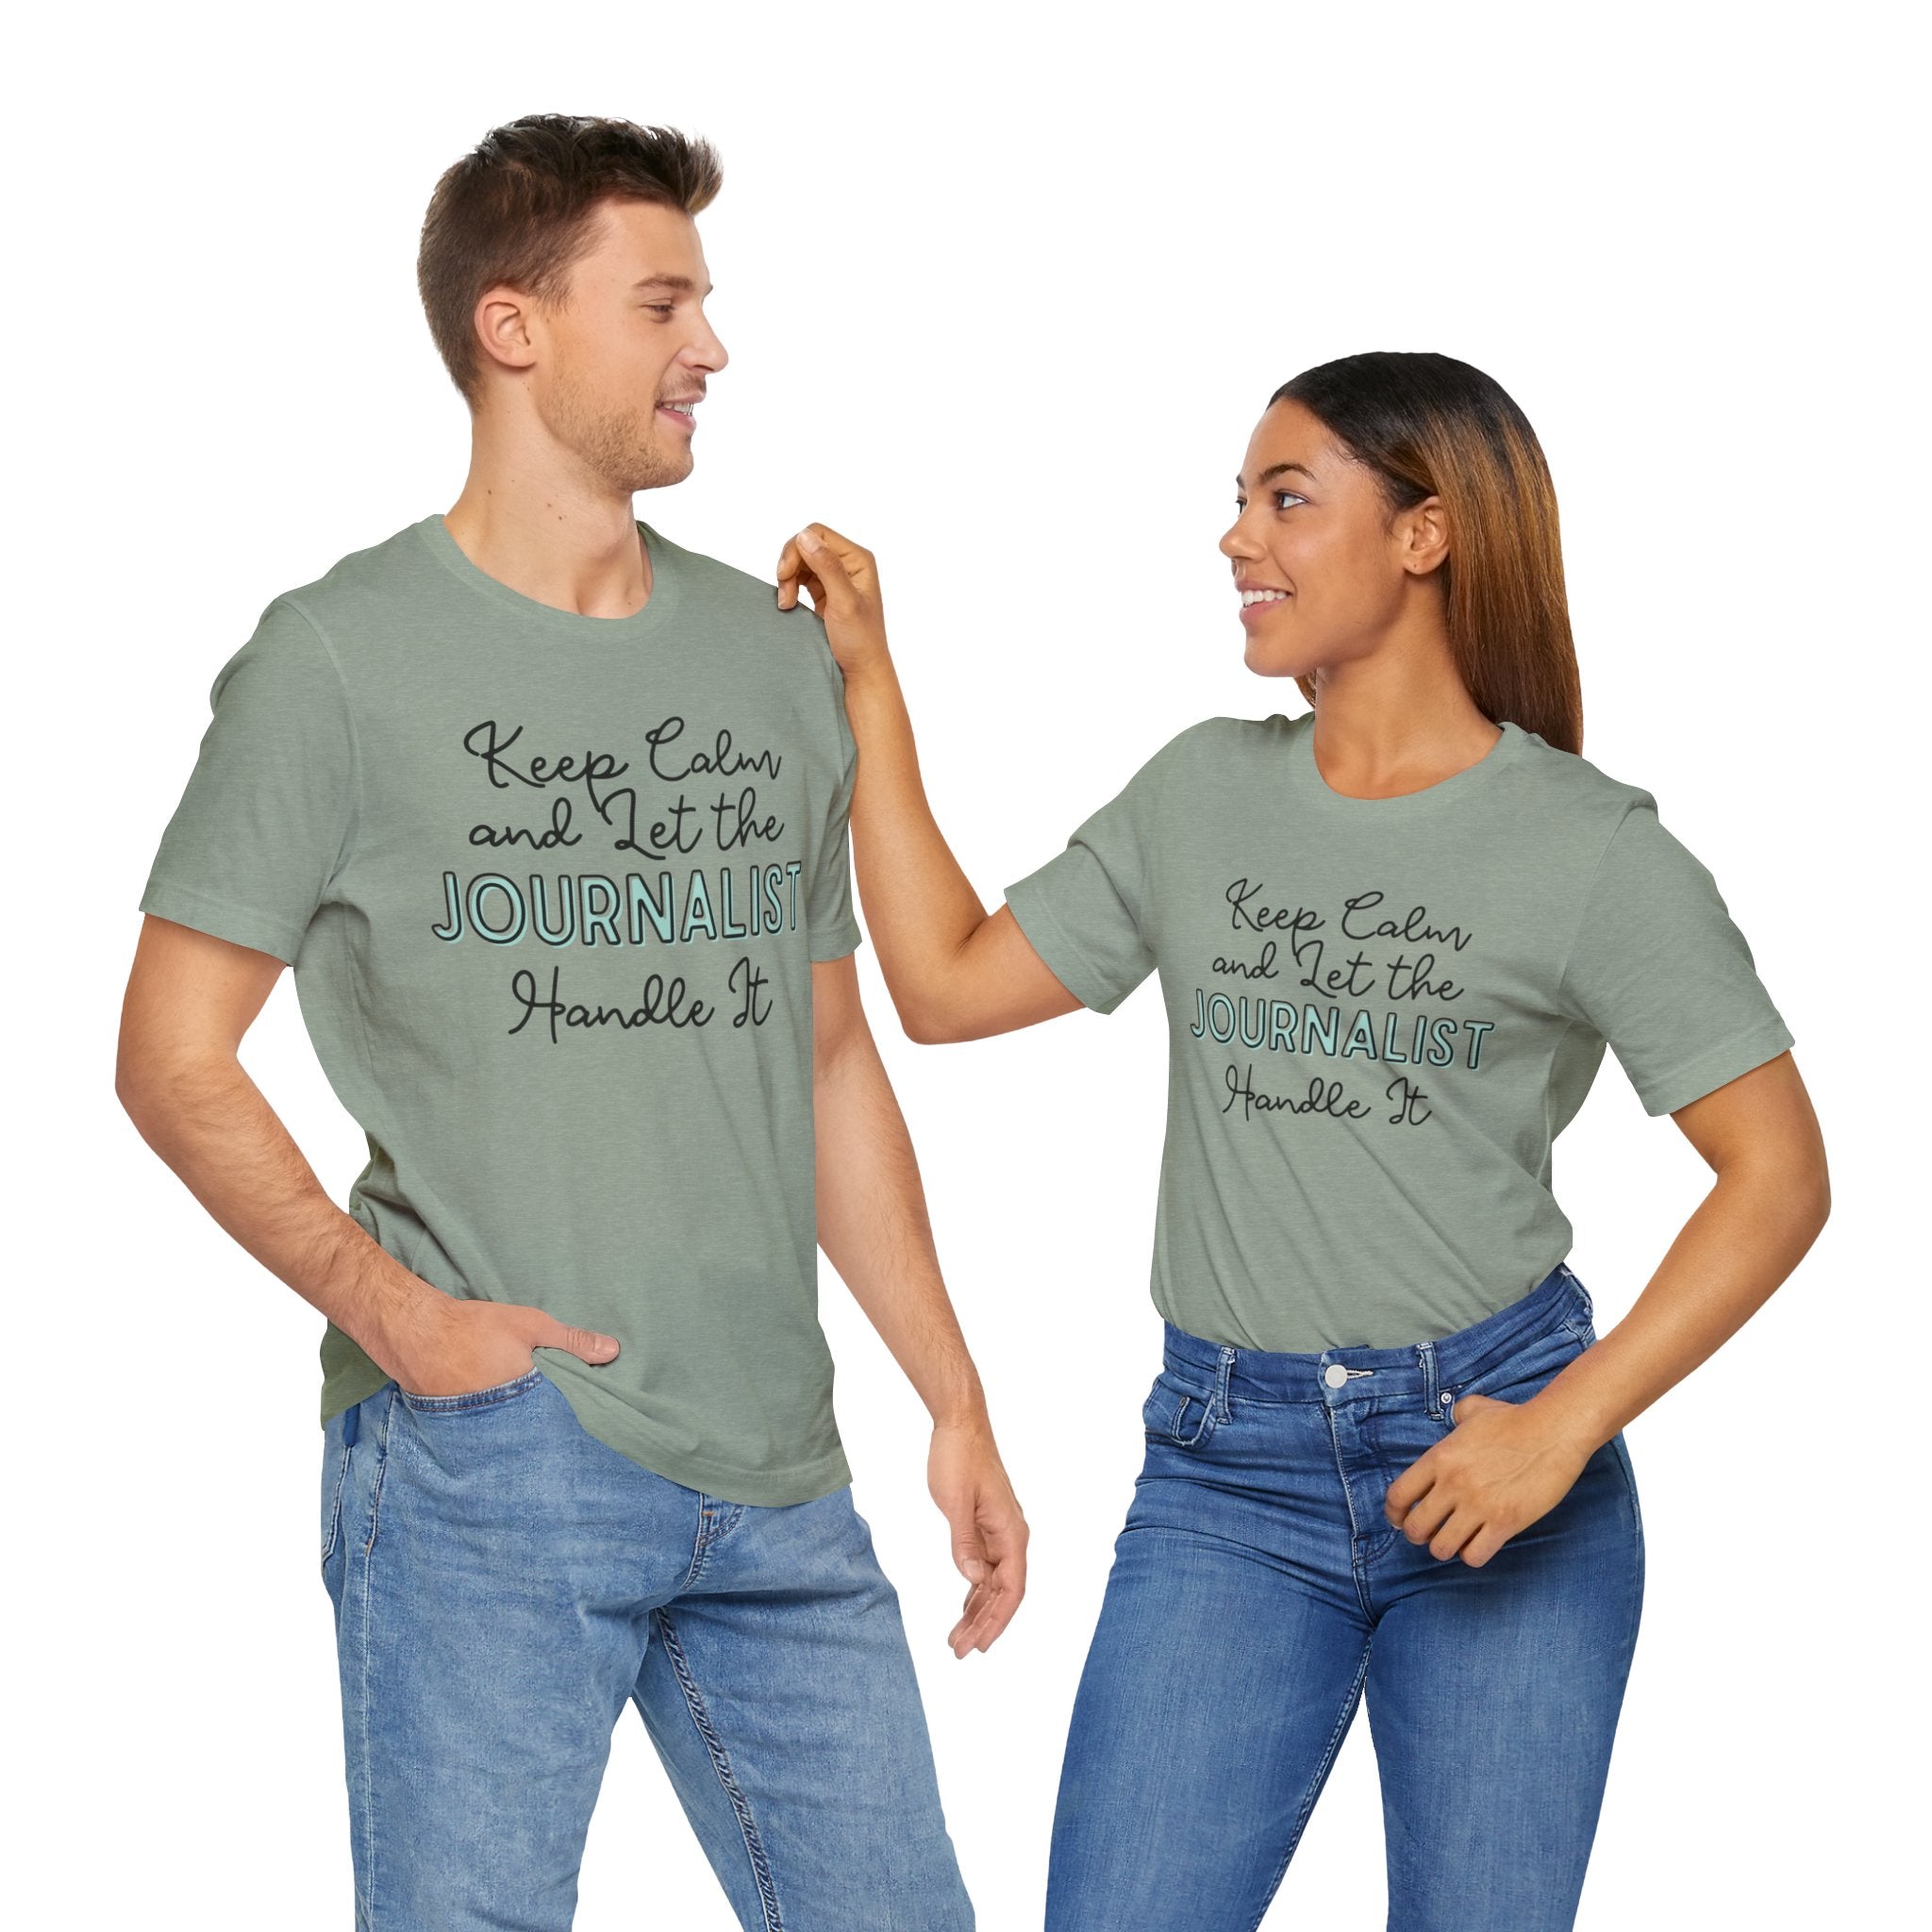 Keep Calm and let the Journalist handle It - Jersey Short Sleeve Tee